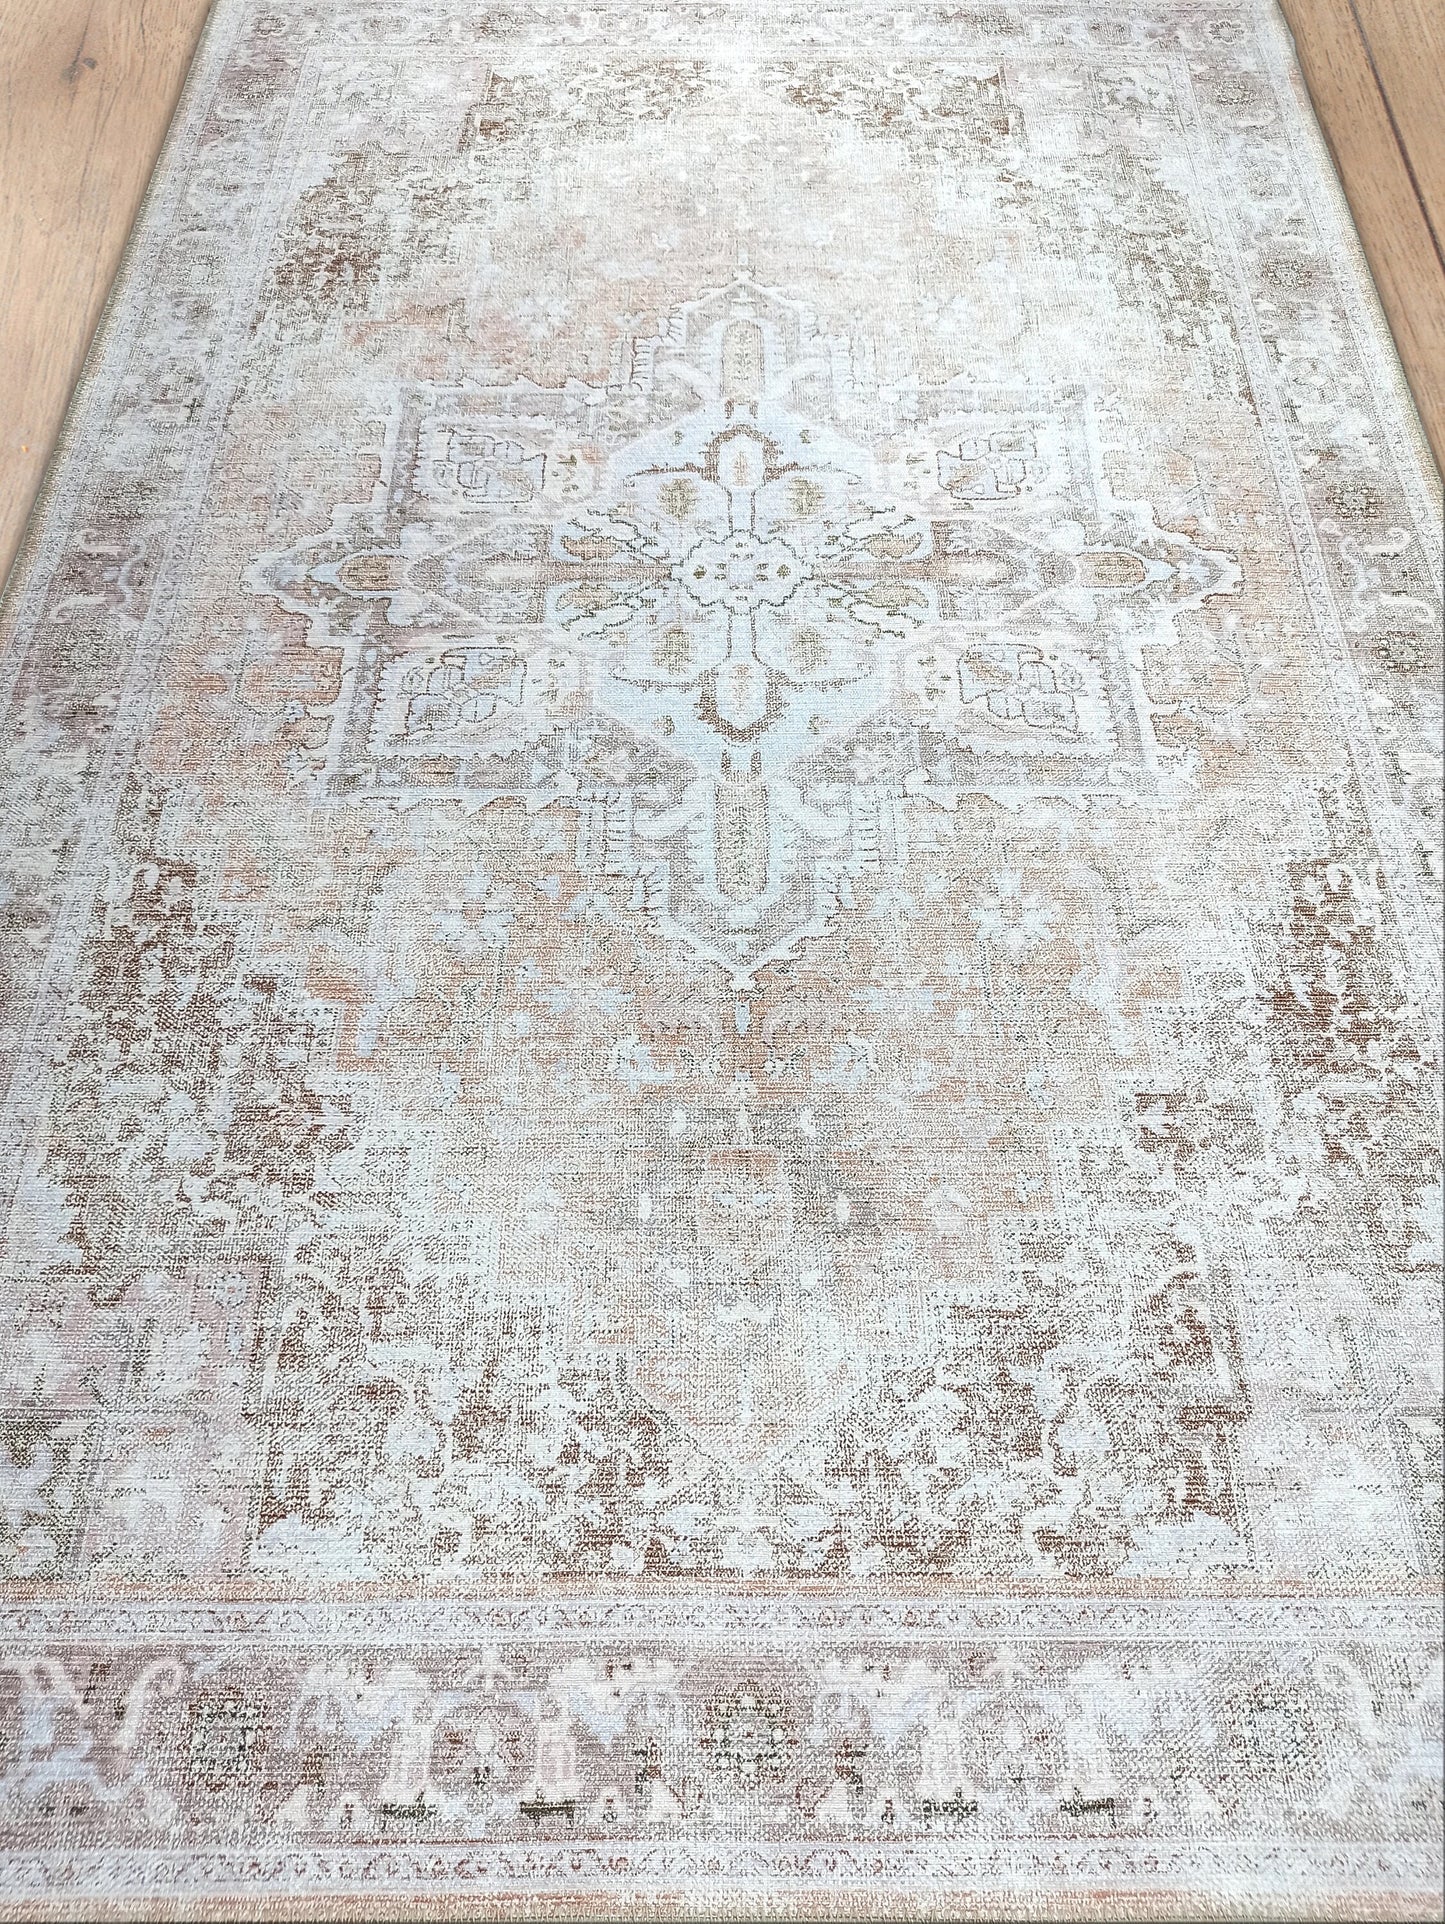 Distressed Persian Heriz Rug, Muted Vintage Shades of Brown with a touch of Beige, Oriental Antique Inspired Area Rugs Living room Bedroom